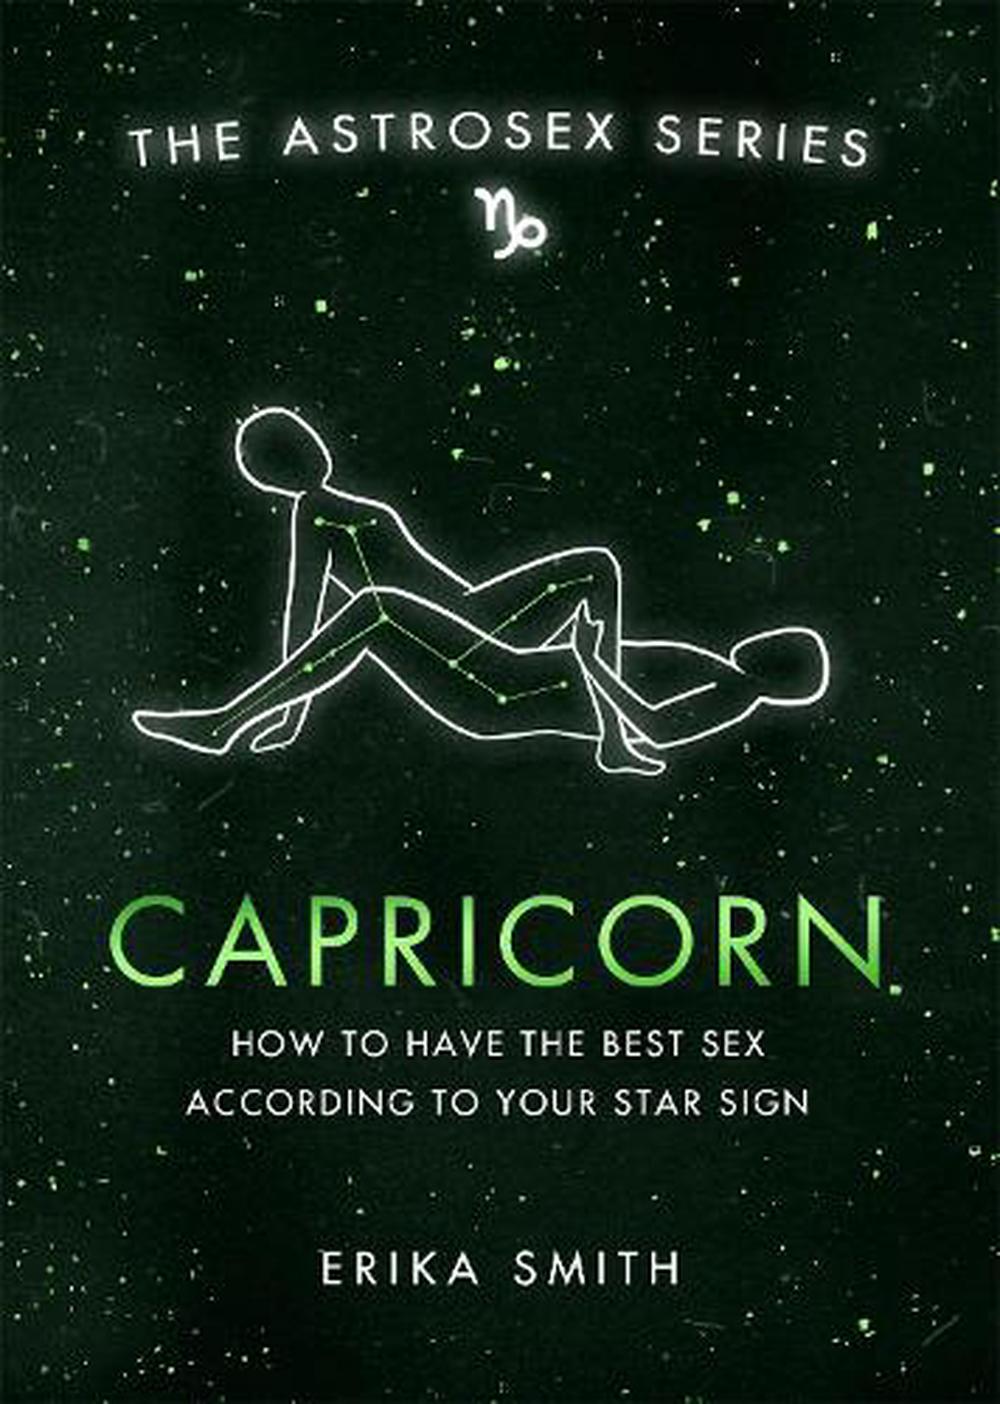 Astrosex: Capricorn by Erika W. Smith, Hardcover, 9781398702127 | Buy  online at The Nile